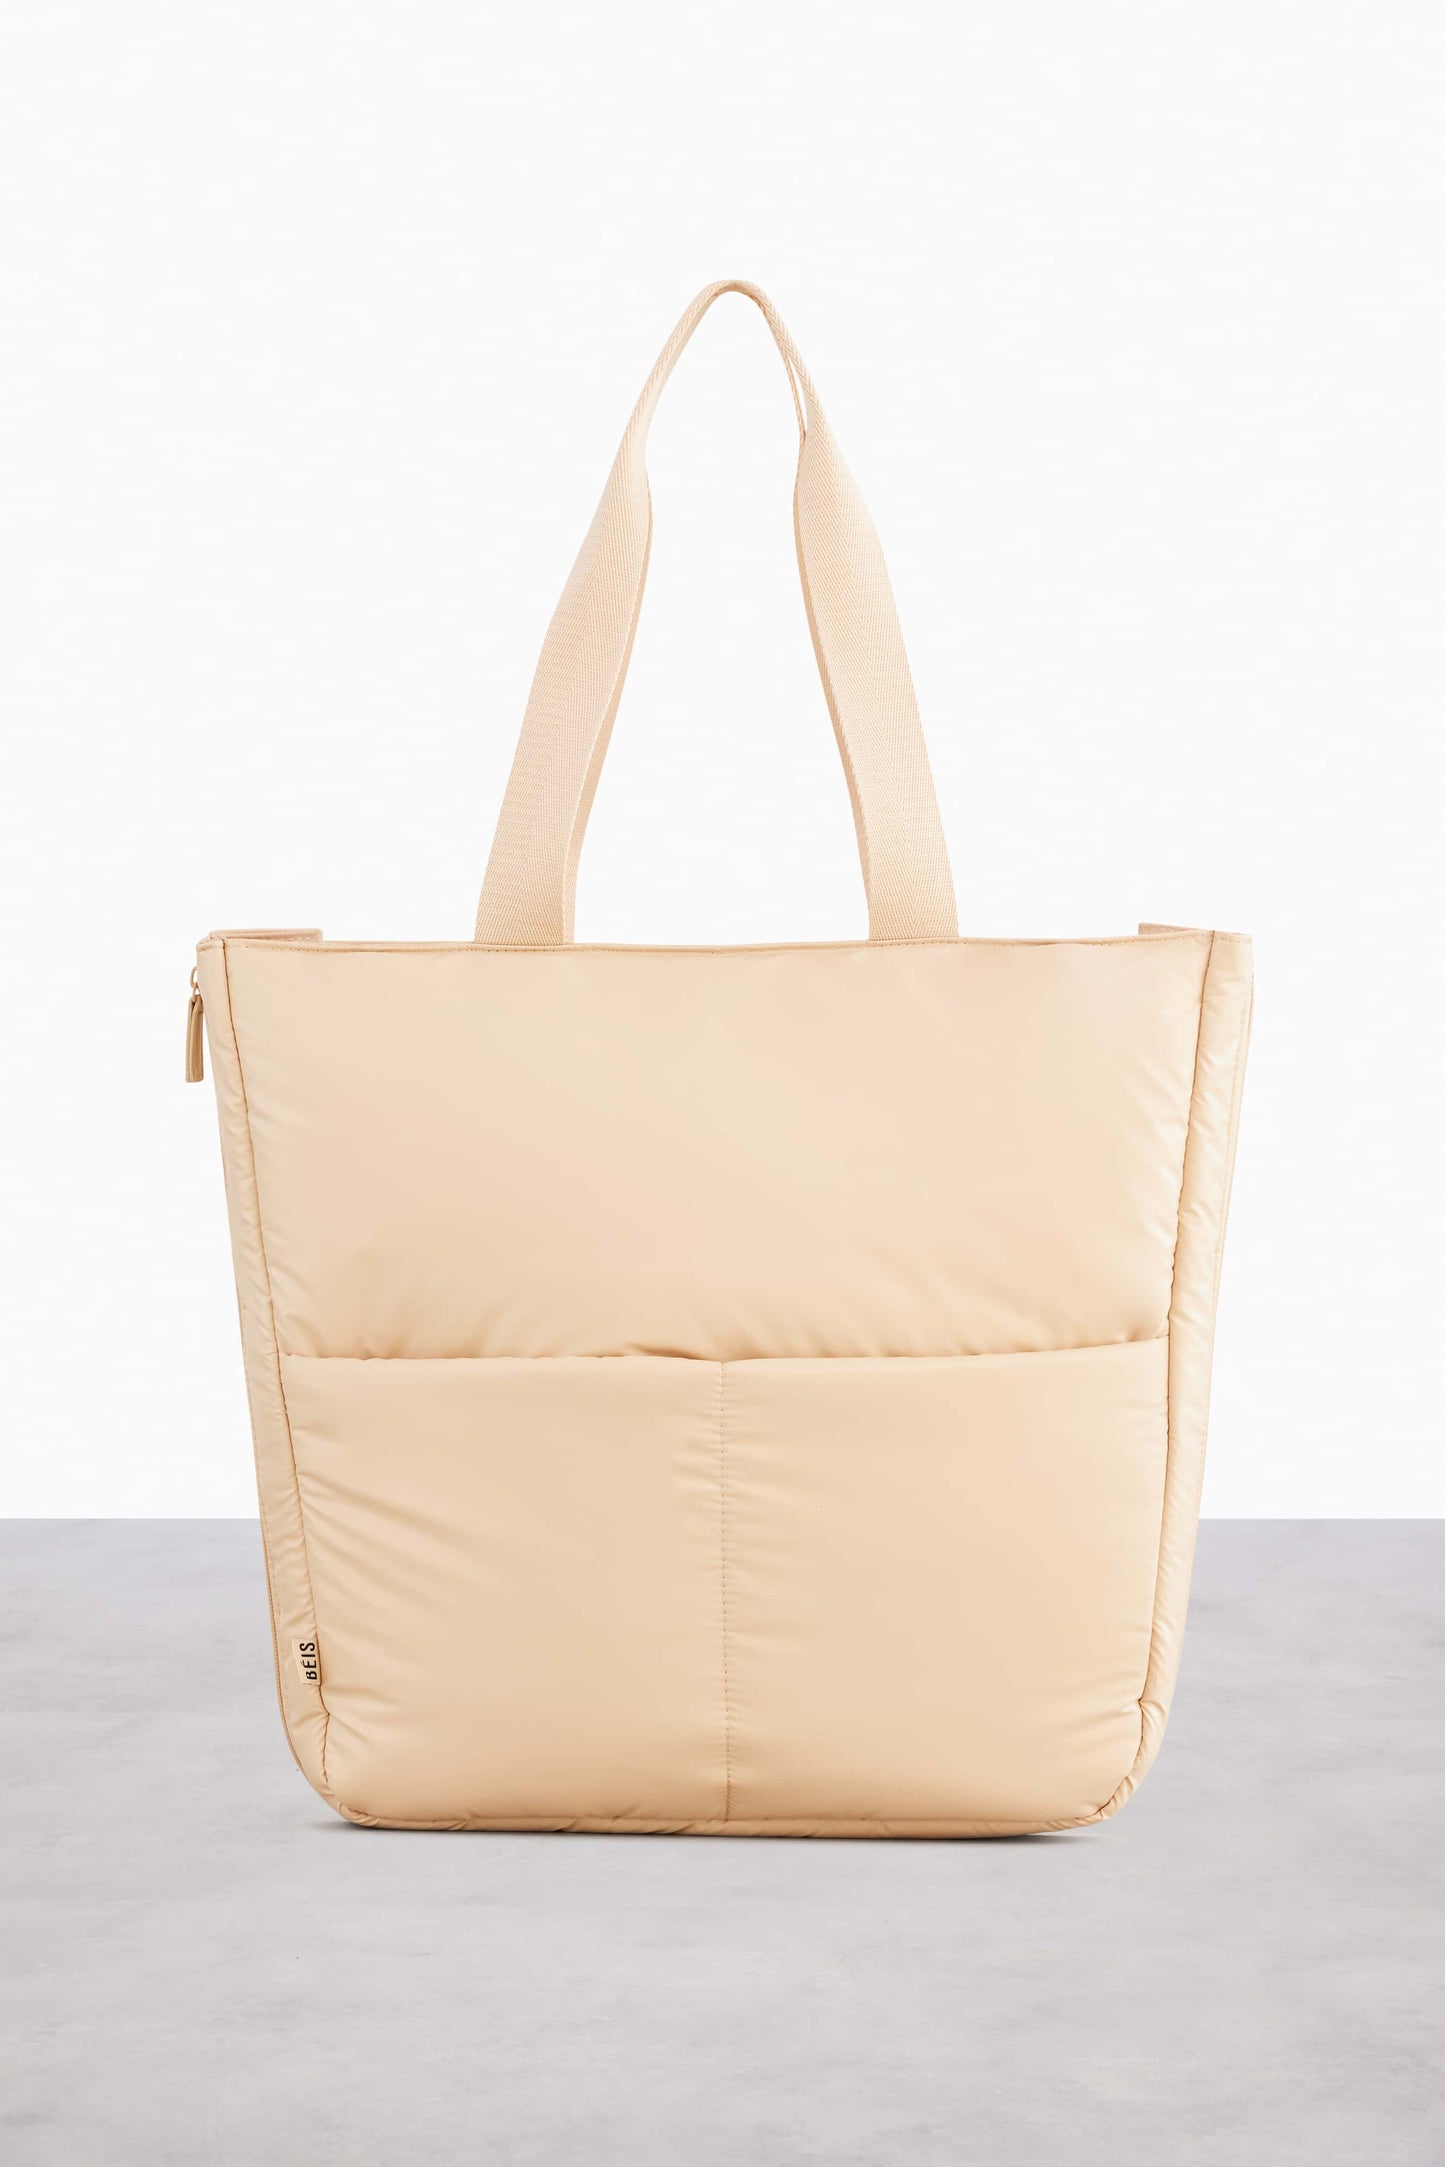 The Expandable Tote in Beige